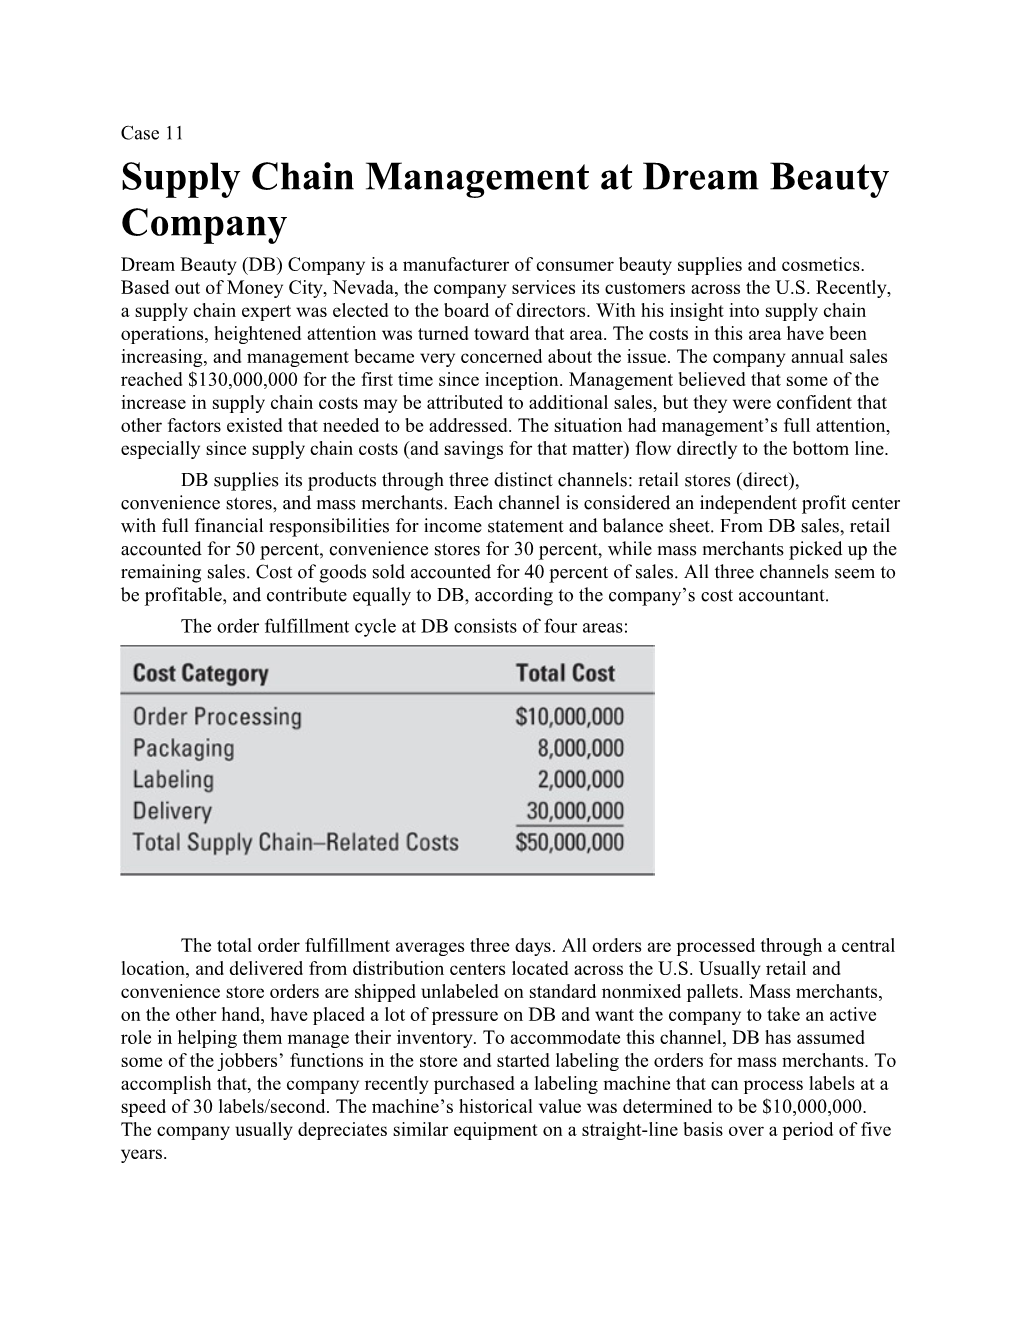 Supply Chain Management at Dream Beauty Company